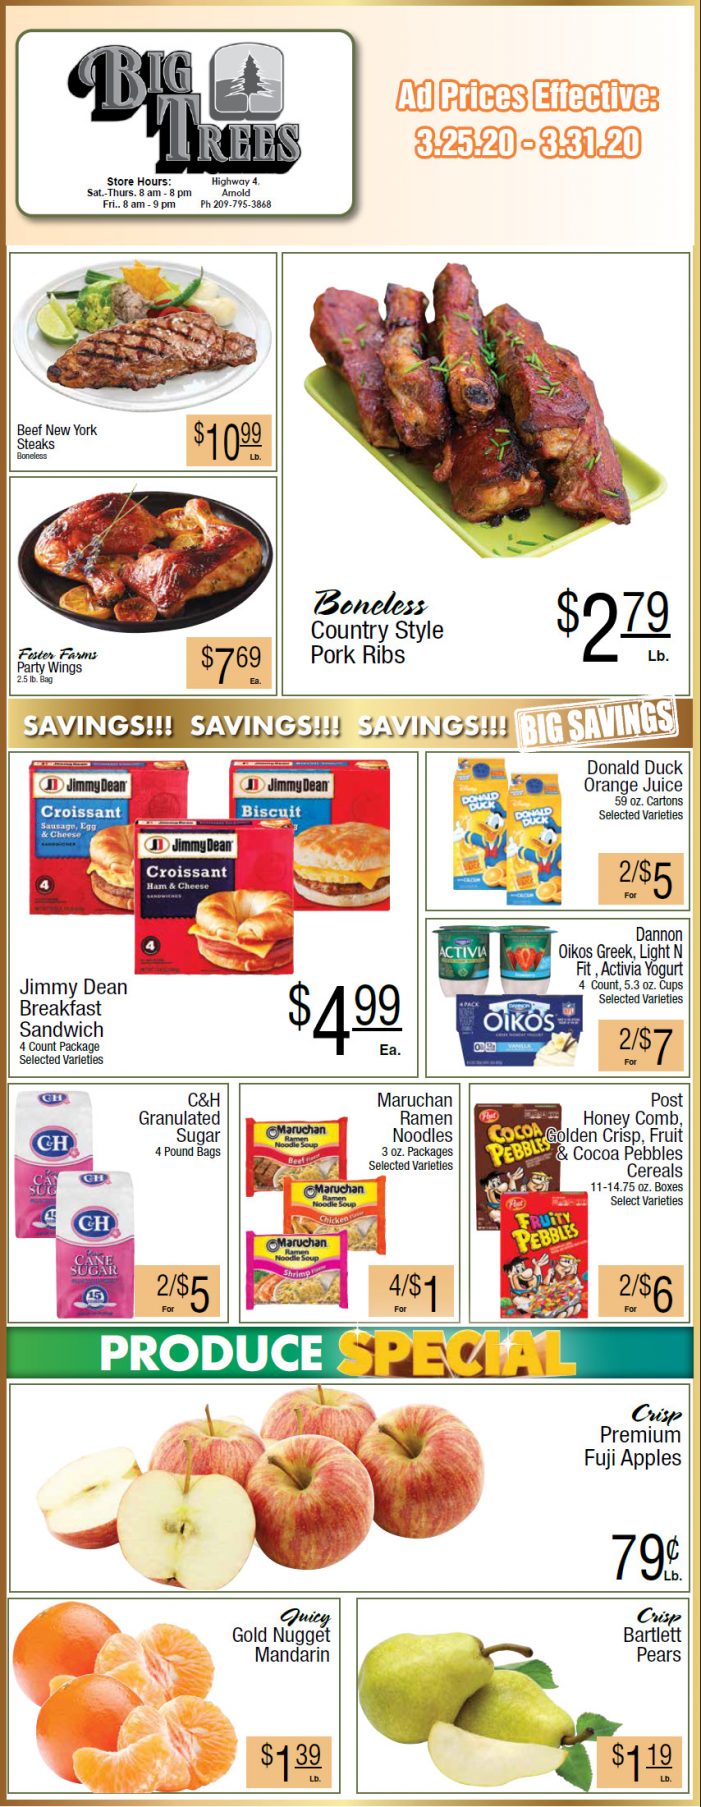 Big Trees Market Weekly Ad & Grocery Specials Through March 31st. Shop Local & Save!!